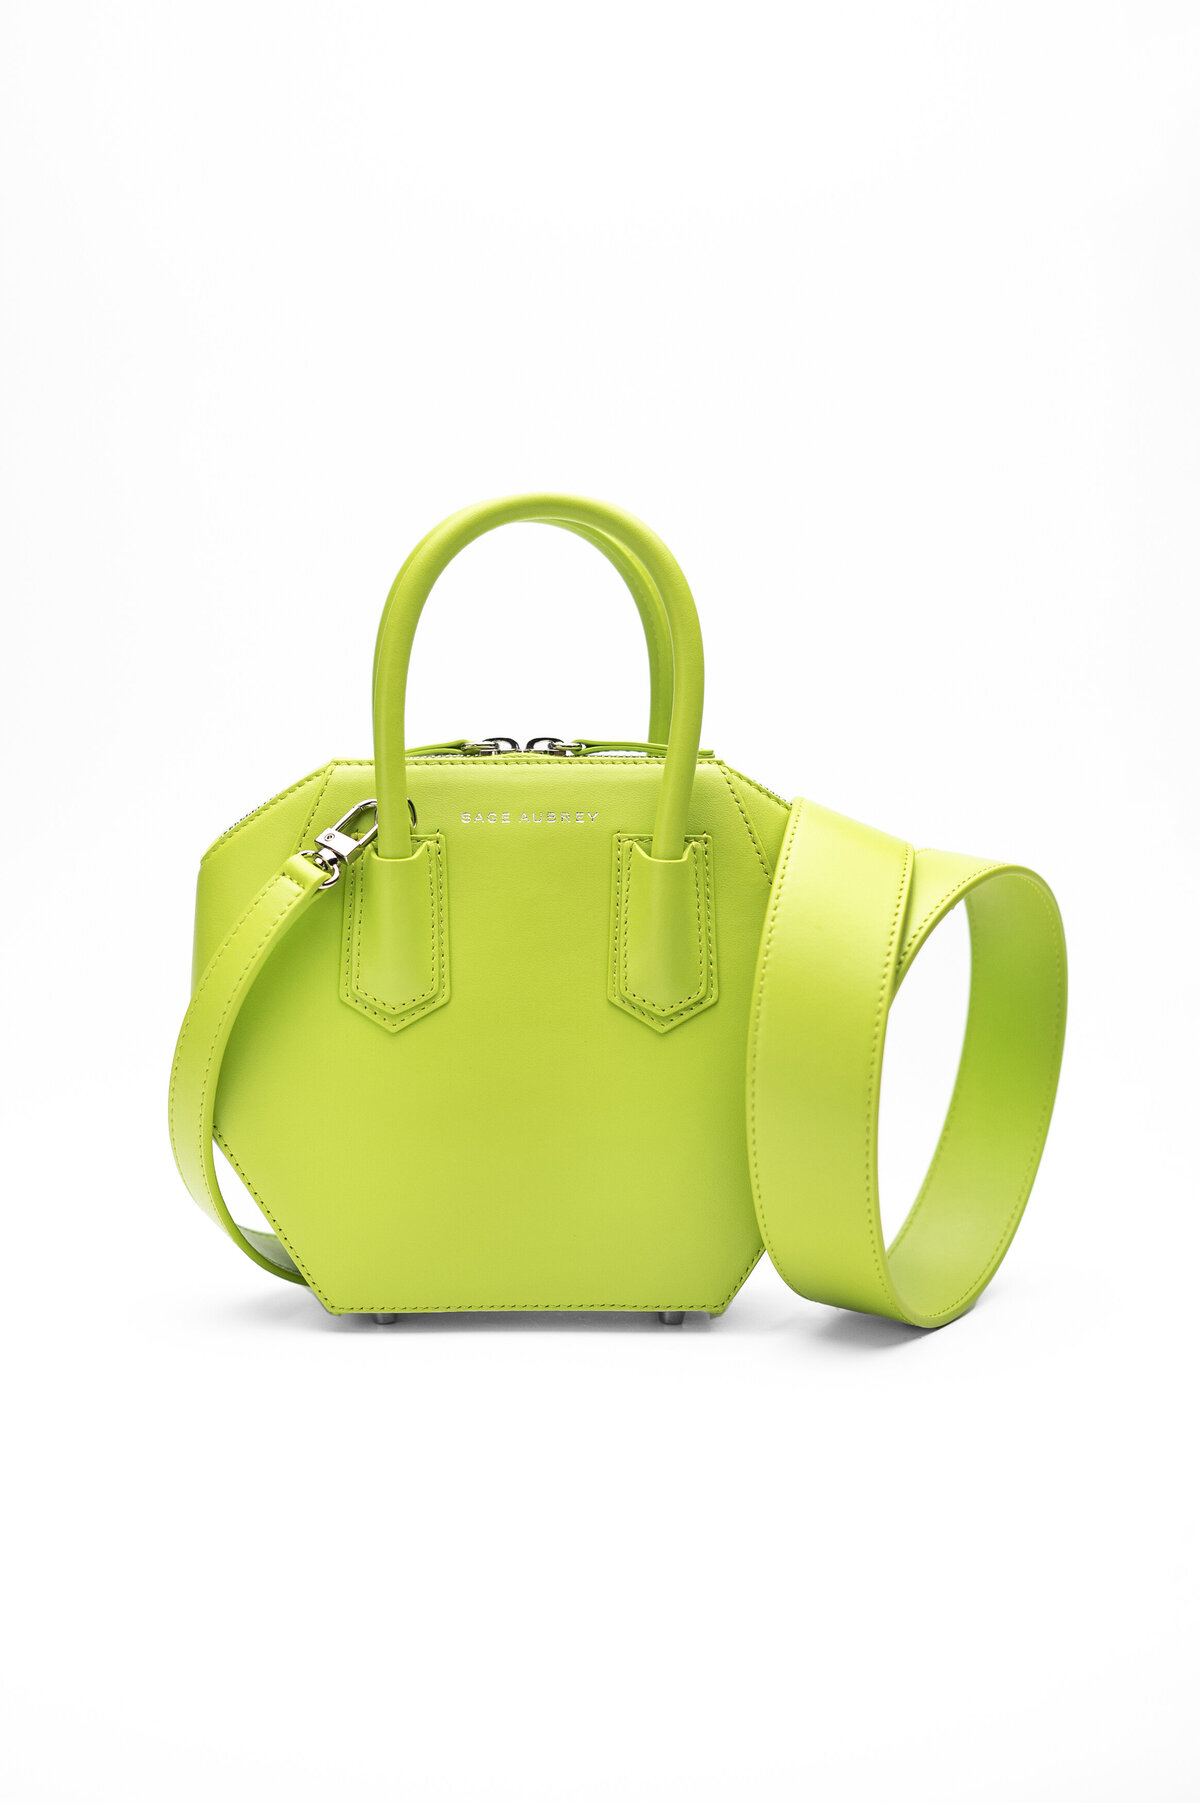 Sage Aubry geometric leather purse in lime green